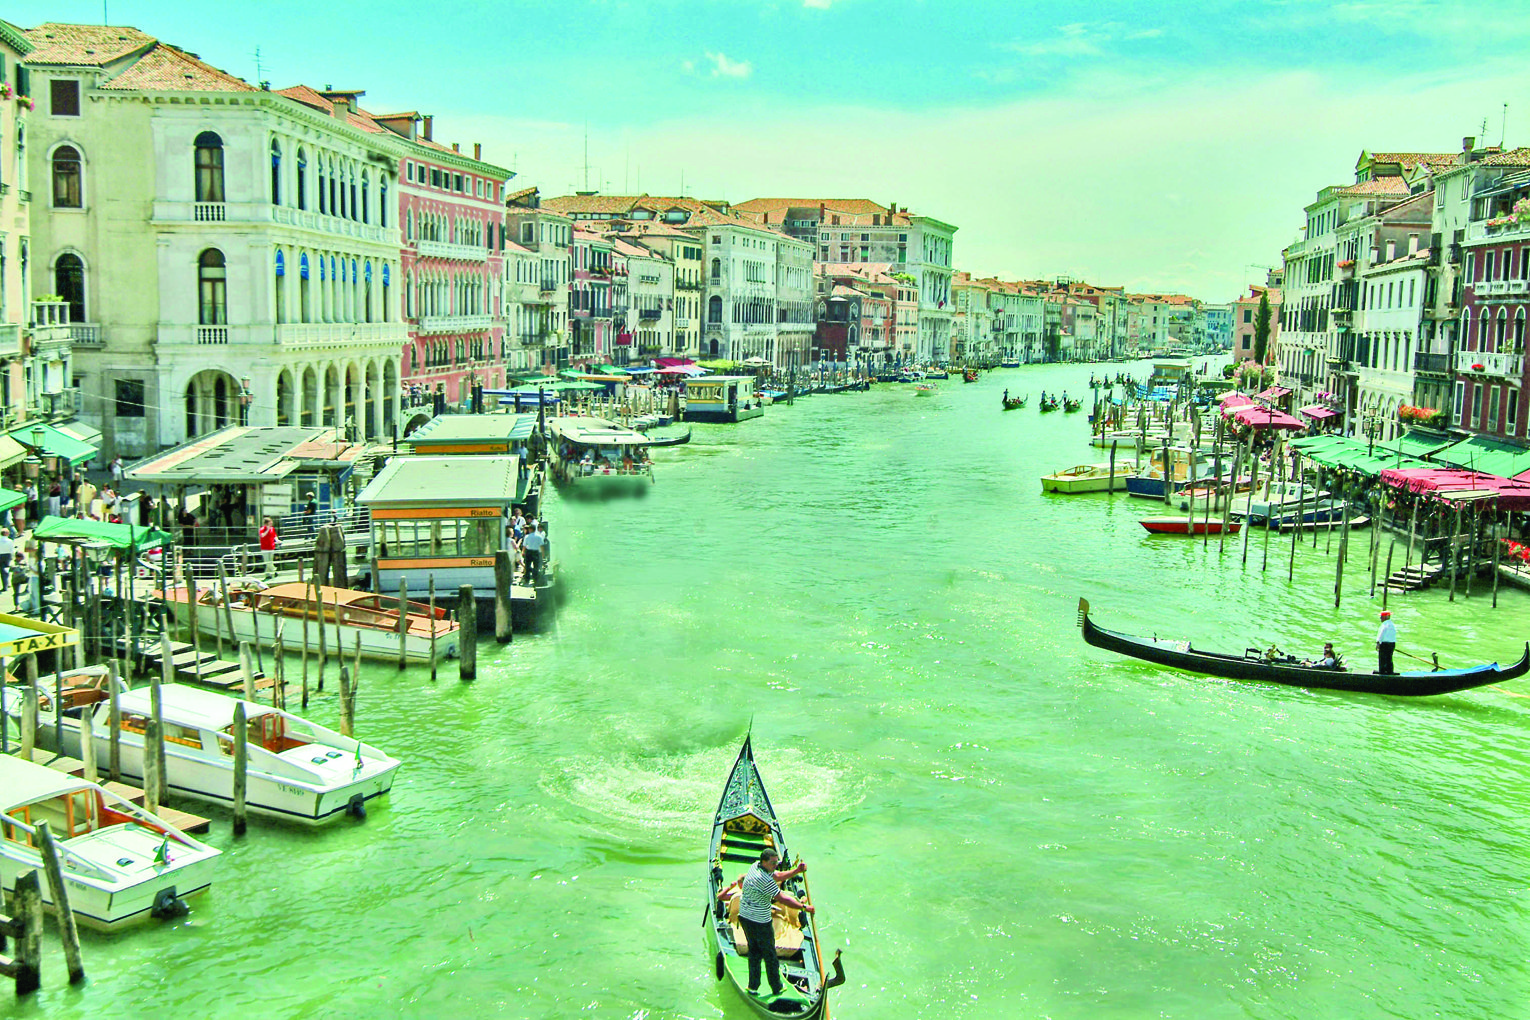 (Above) The beautiful waterways of Venice provide breathtaking views. However, the city of Venice is no stranger to crime and death. While the waterways are beautiful, they contain a rich and rather haunted history. Whether it is polluted waters or the dead bodies of cursed citizens, the waters of the city of Venice are a history waiting to be explored. 